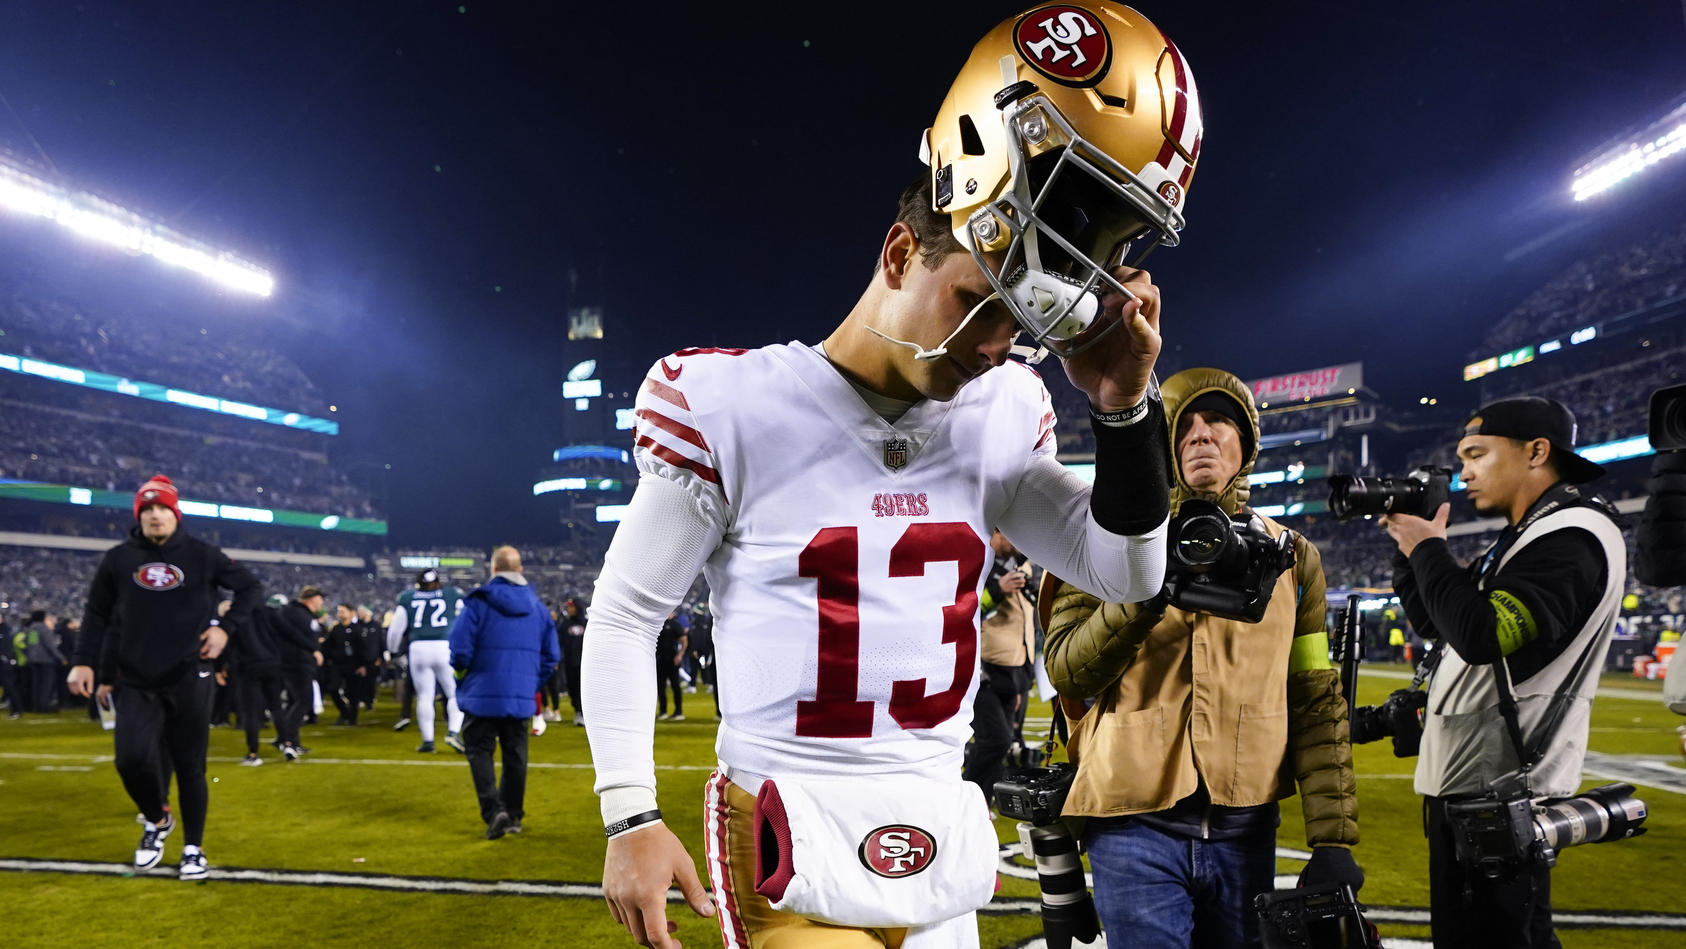 San Francisco 49ers quarterback Brock Purdy leaves the field after the NFC Championship NFL football game between the Philadelphia Eagles and the San Francisco 49ers on Sunday, Jan. 29, 2023, in Philadelphia. The Eagles won 31-7. (AP Photo/Chris Szag